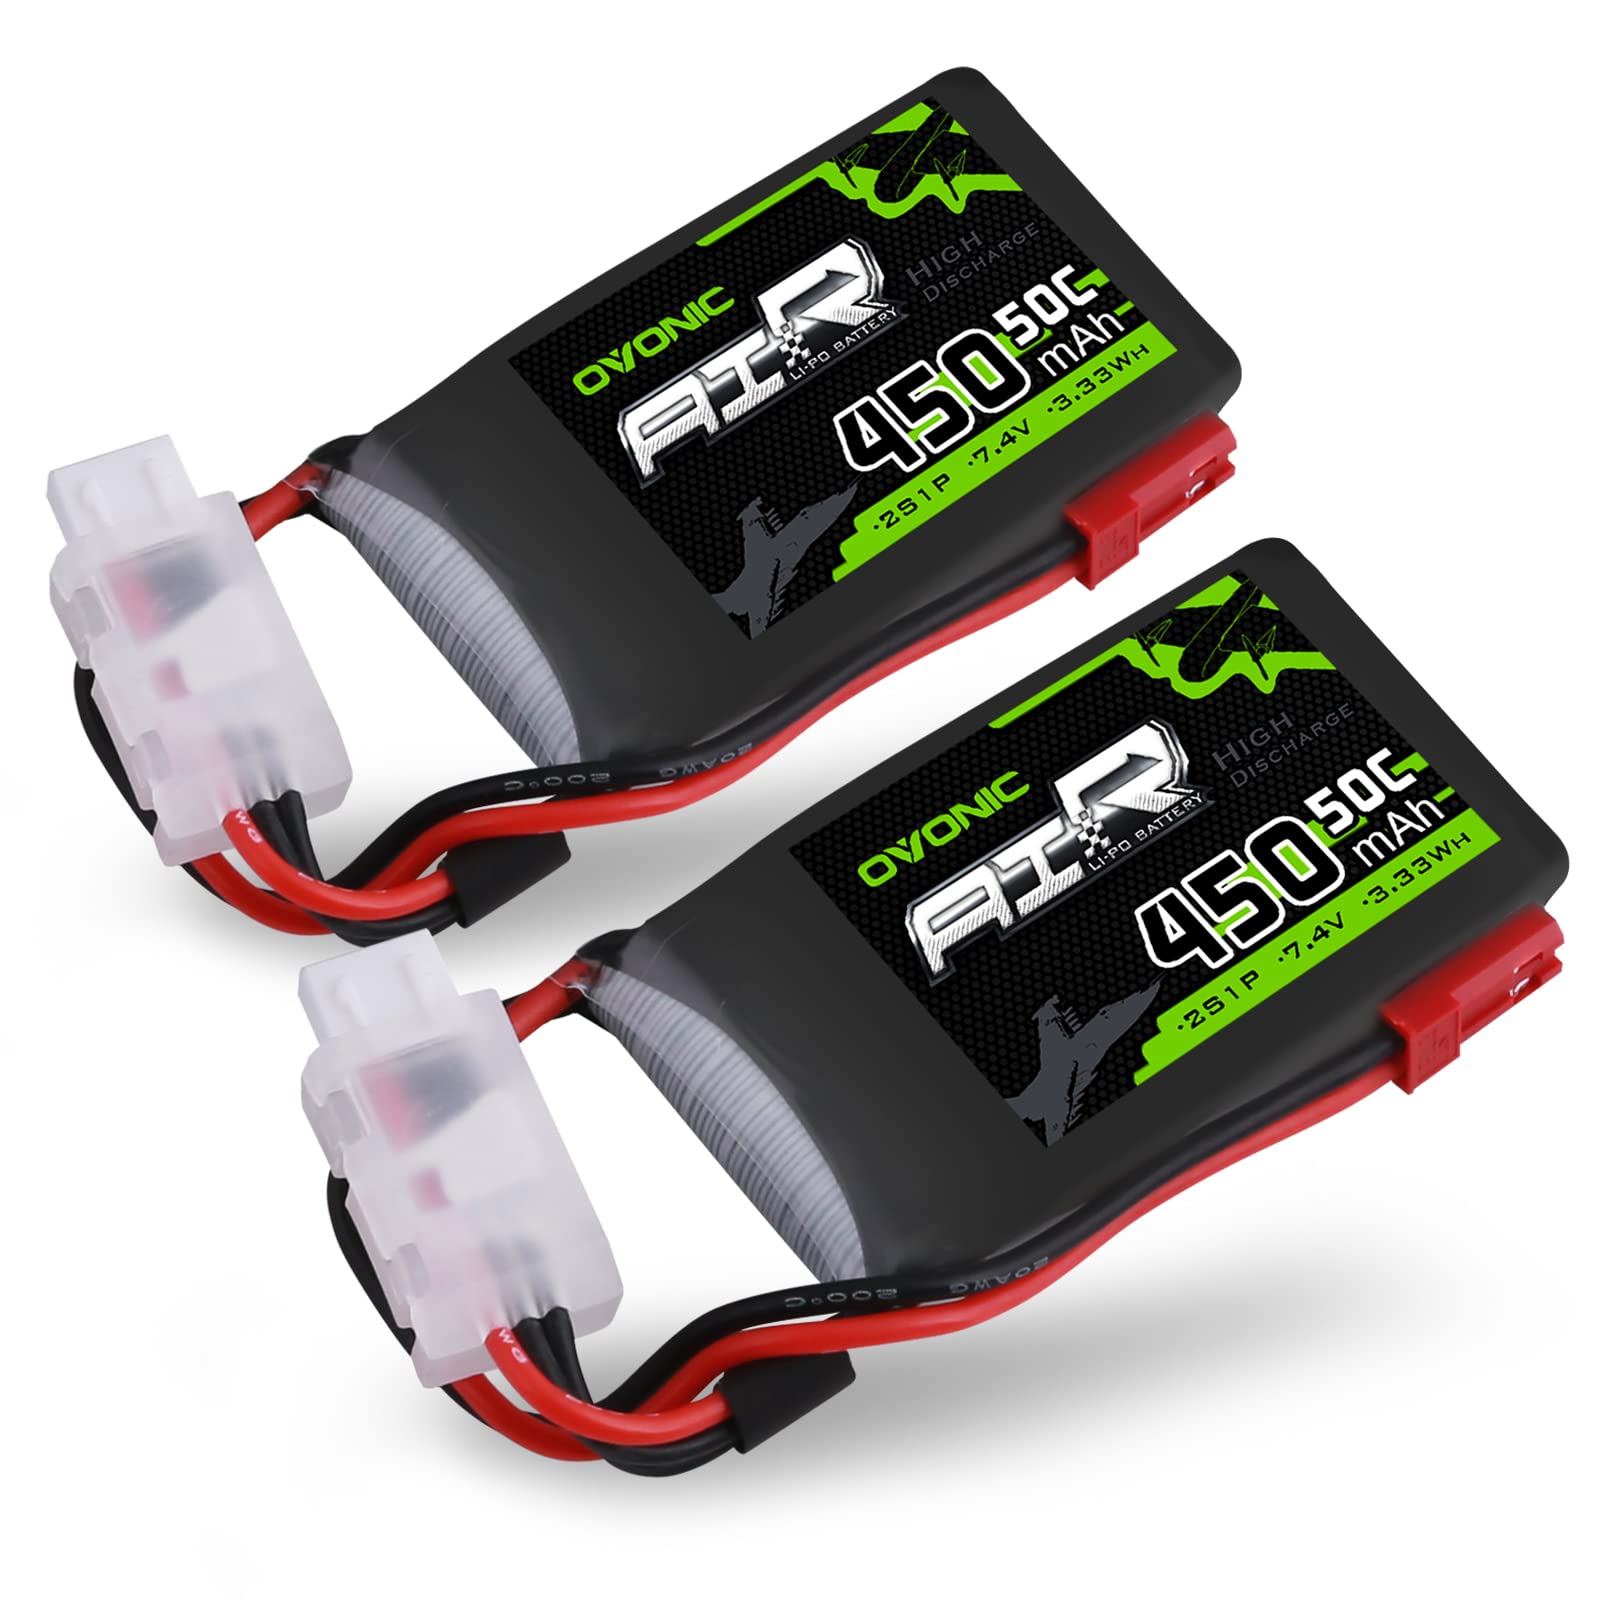 2×OVONIC 50C 7.4V 2S 450mAh LiPo Battery with JST Plug for Small Helicopter Airplane